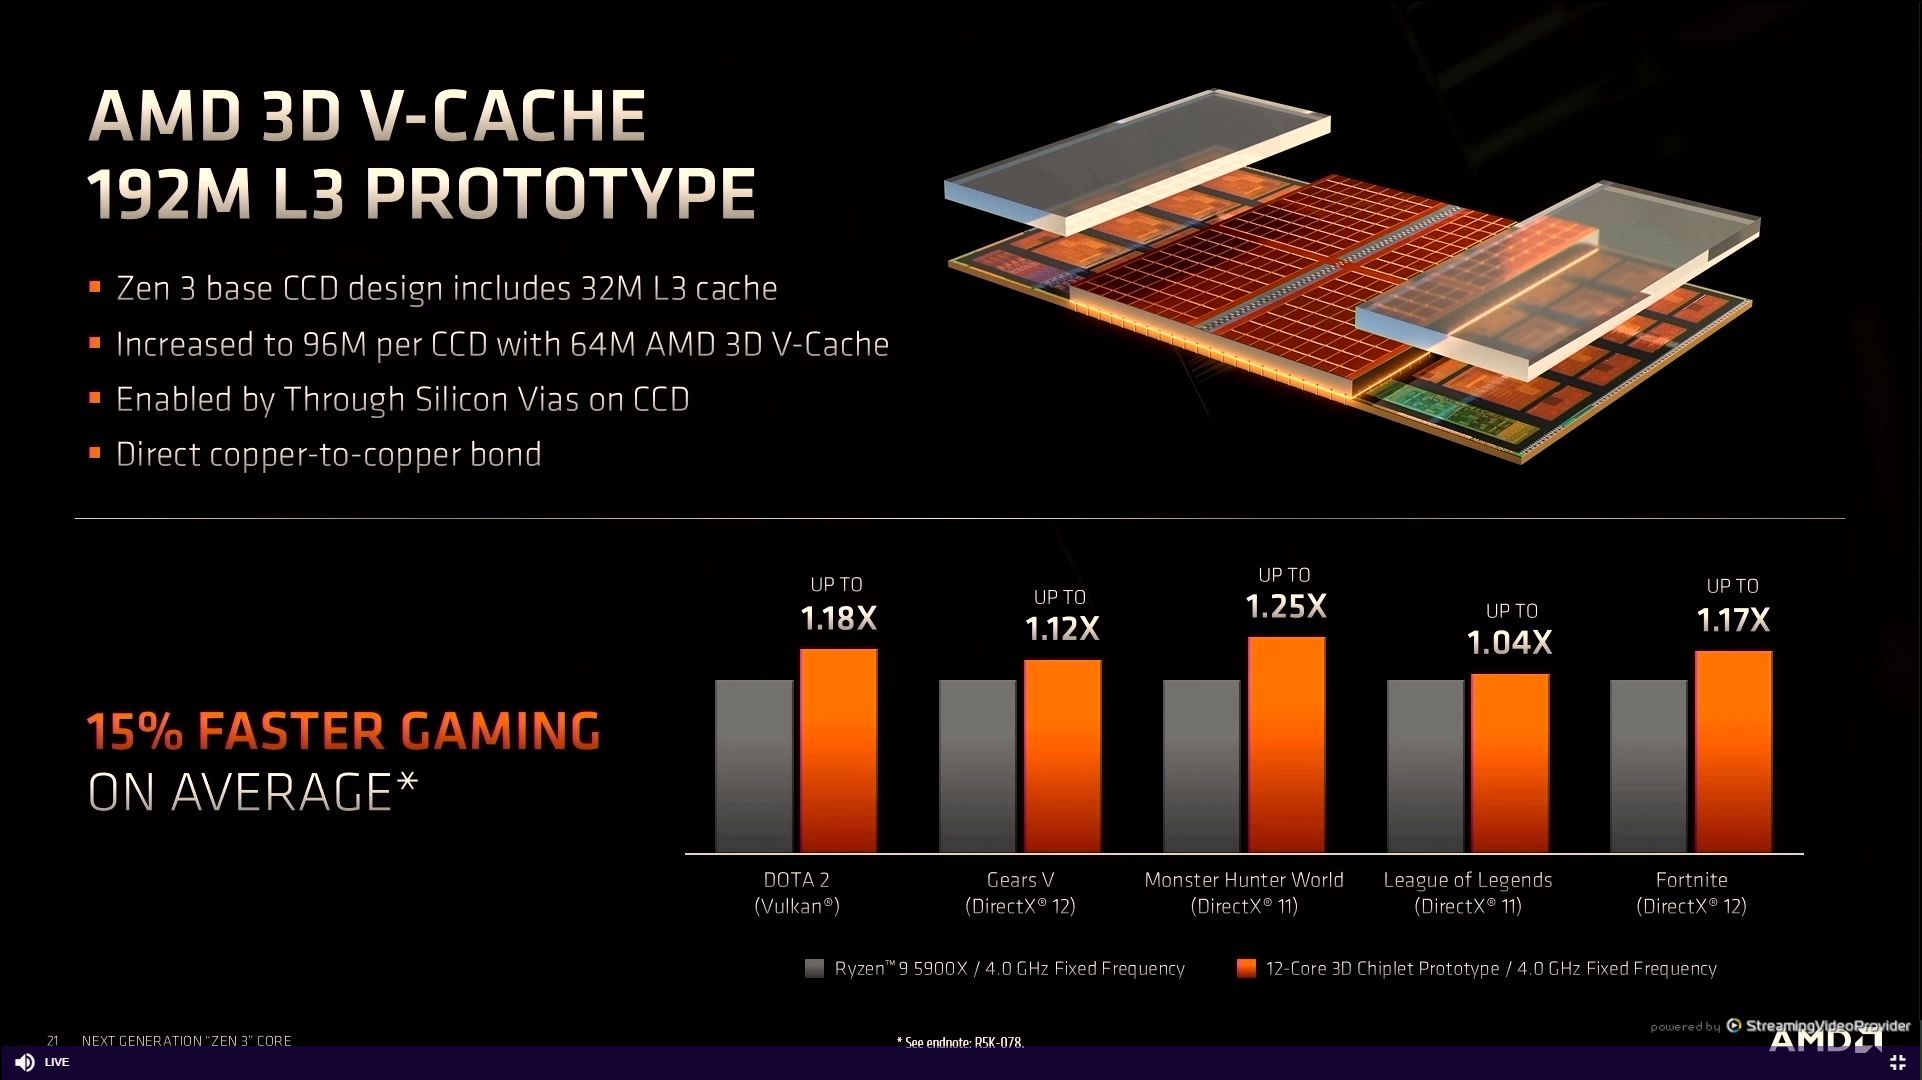 AMD Ryzen 5000 series processors: Everything you need to know